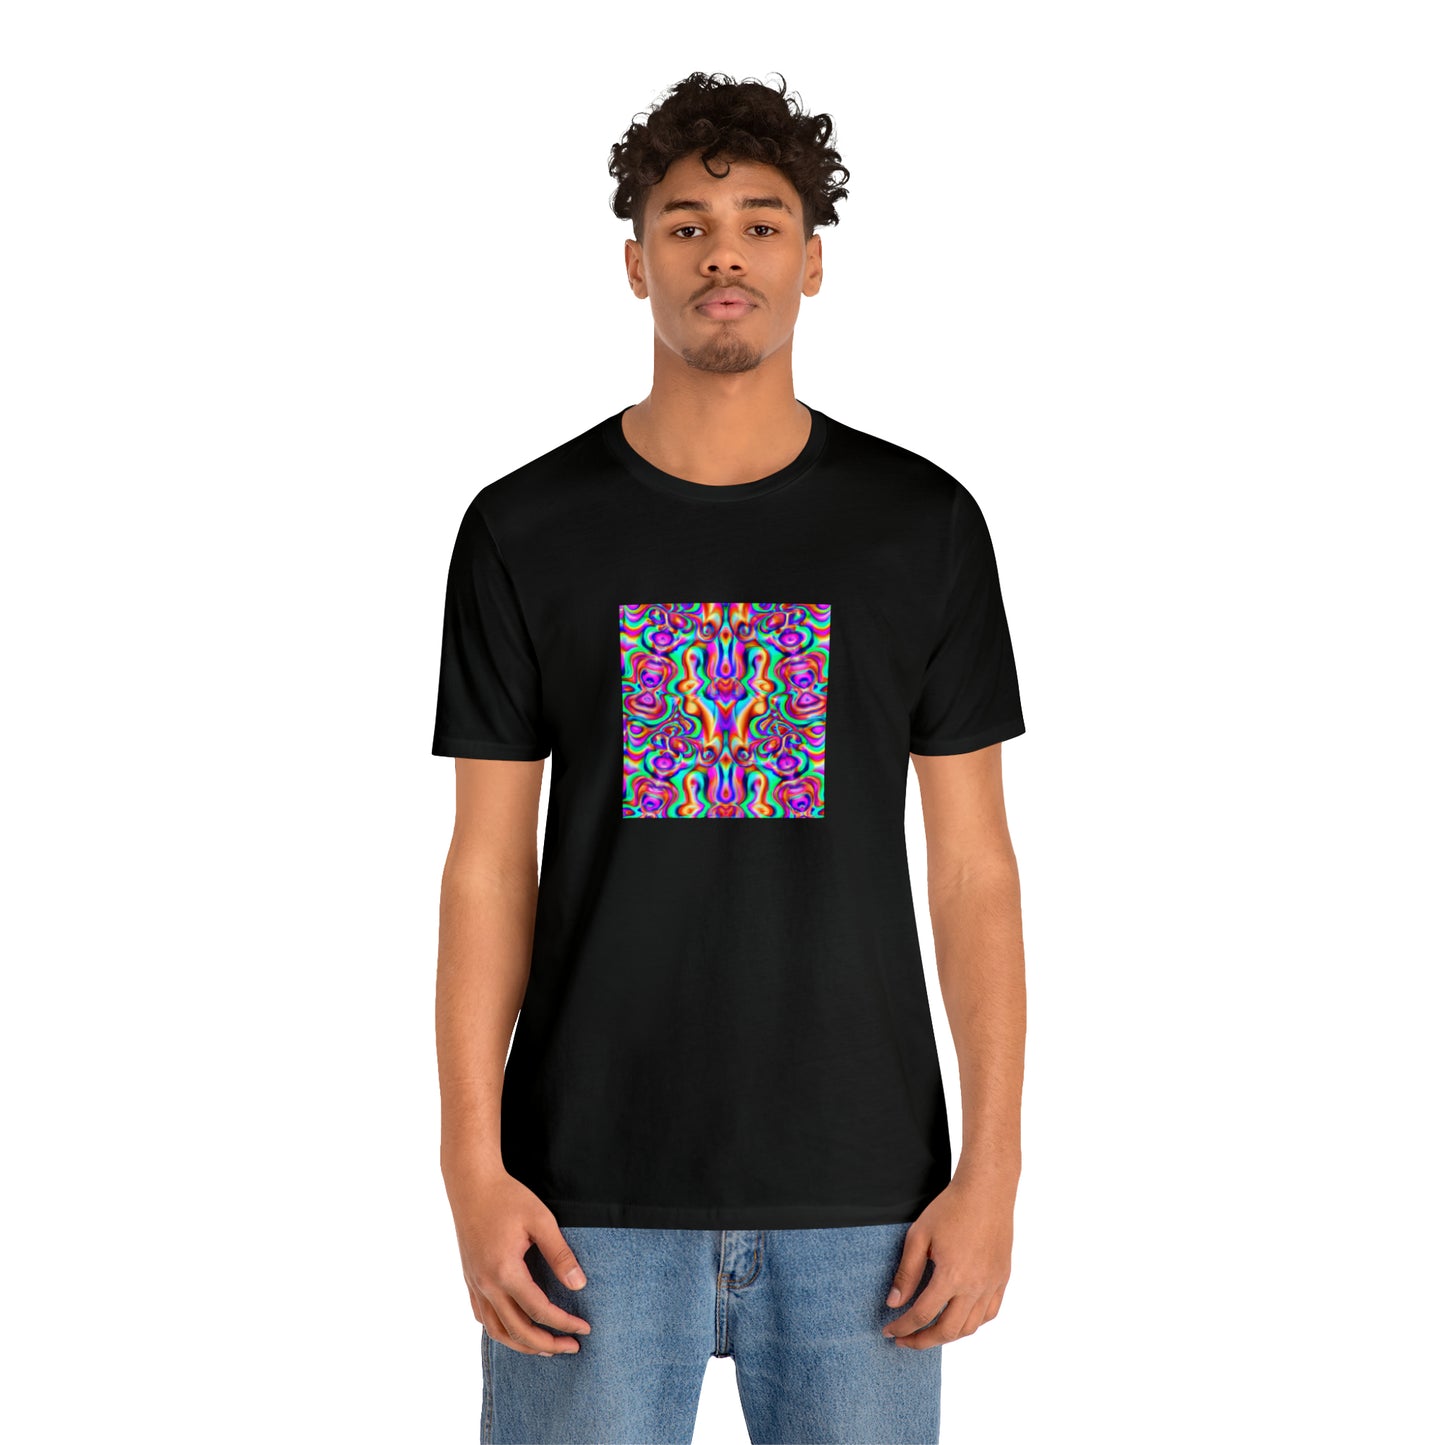 Sally May Montgomery - - Psychedelic Trippy Pattern Tee Shirt